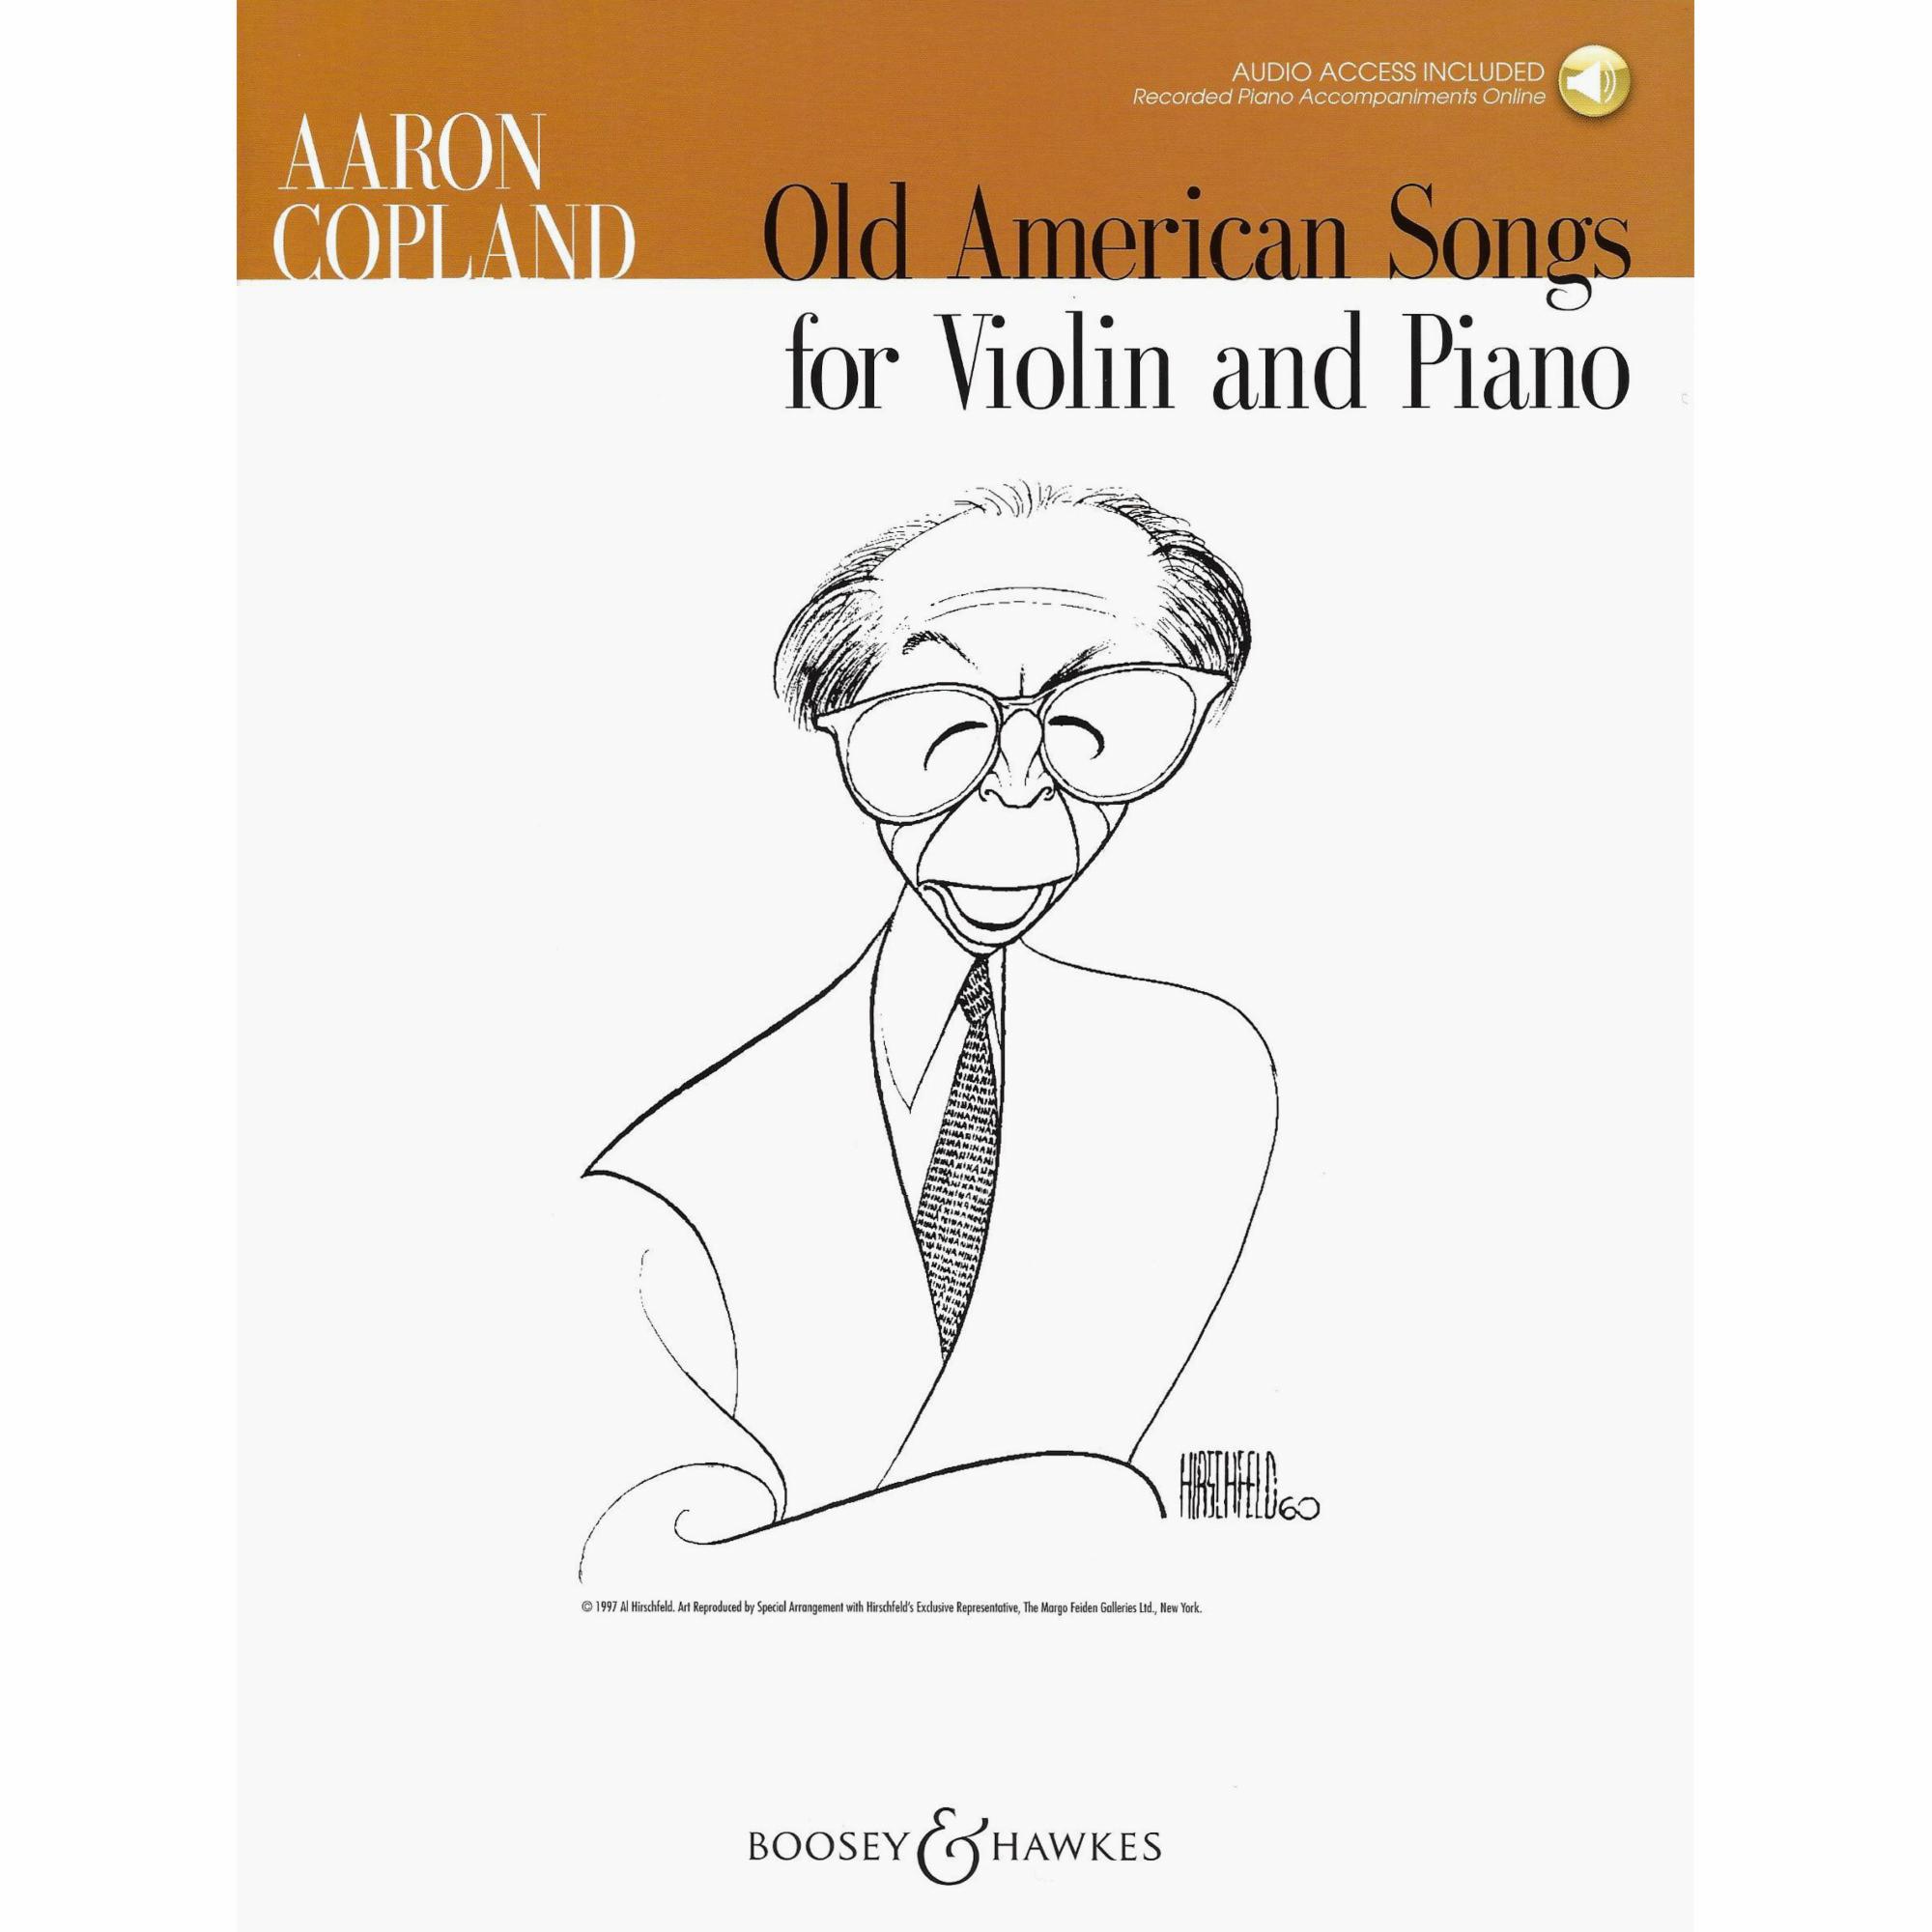 Copland -- Old American Songs for Violin and Piano